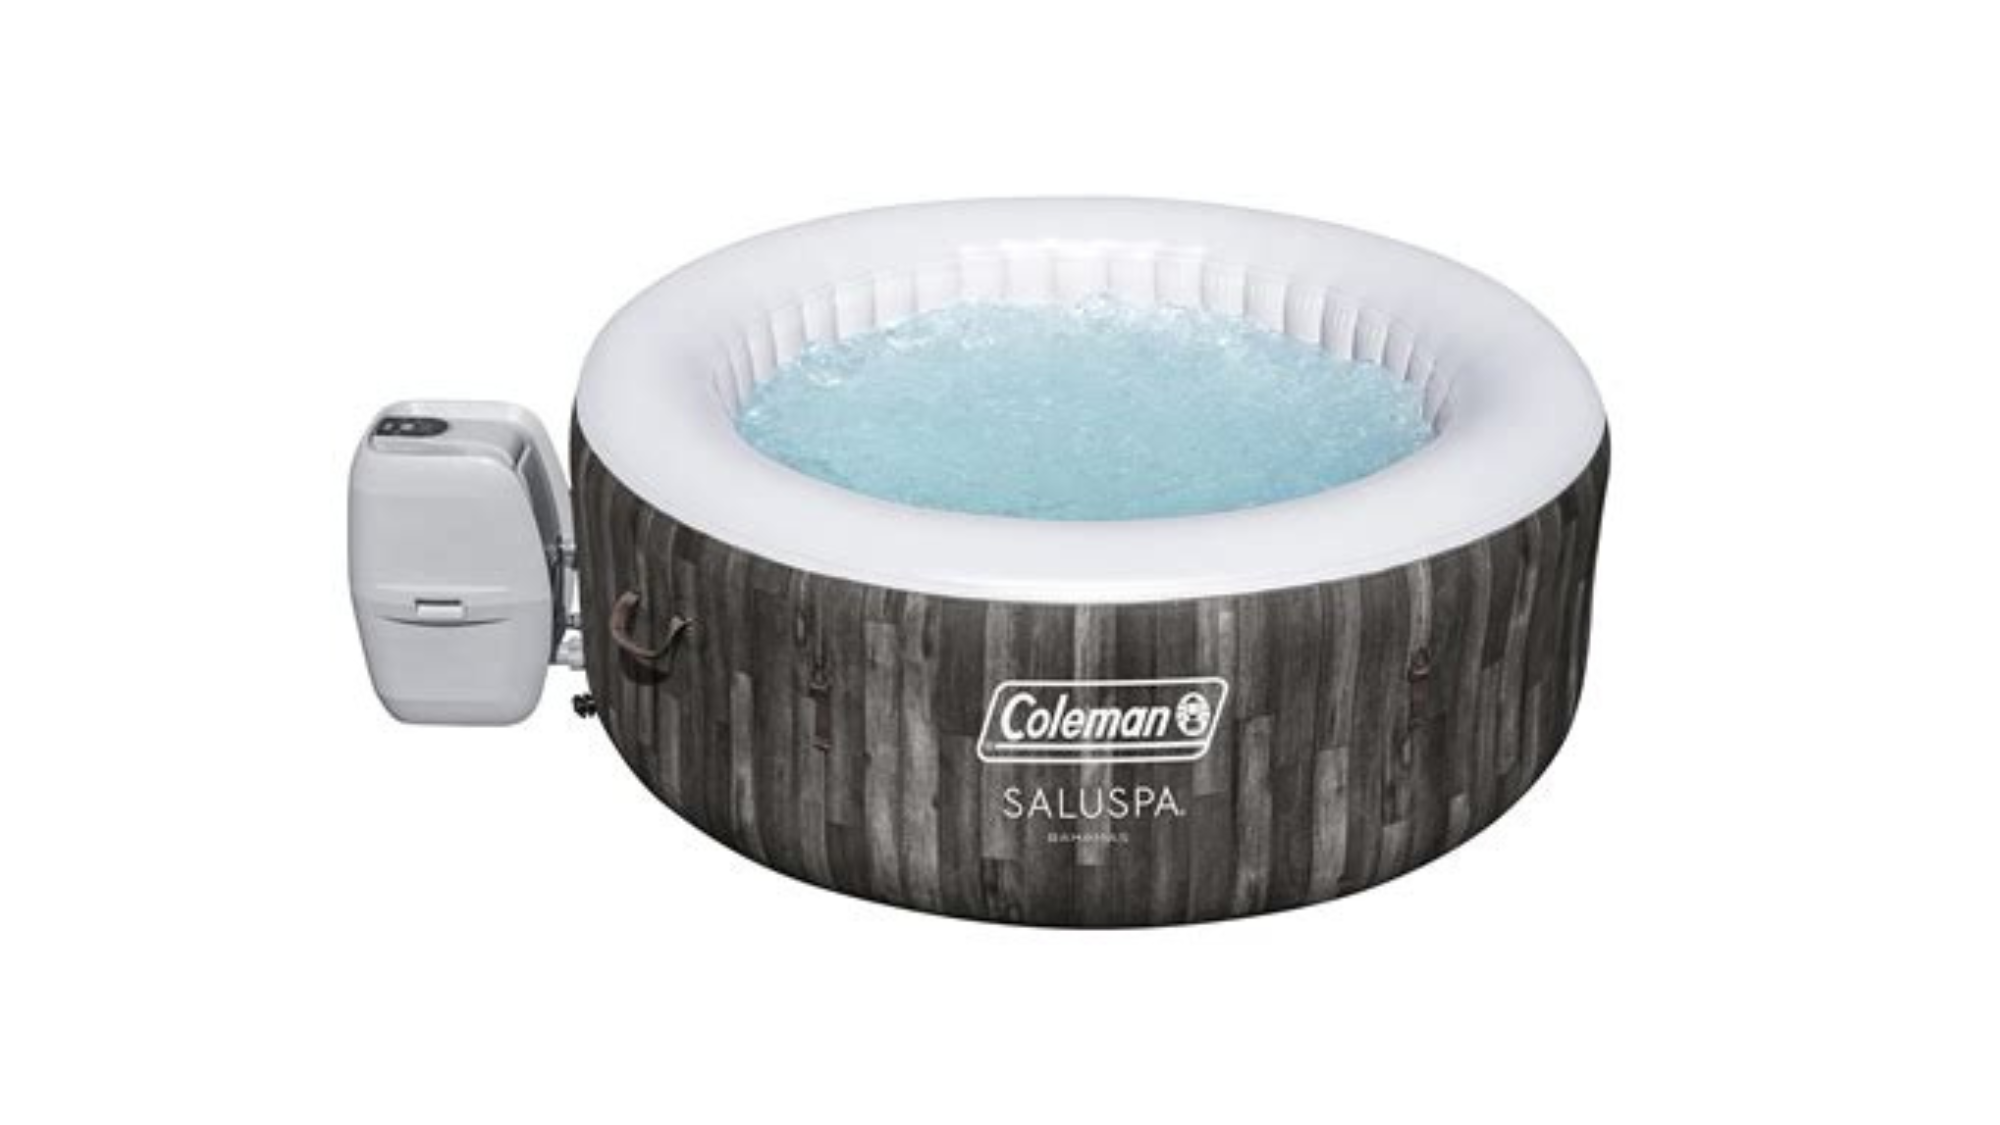 Coleman SaluSpa AirJet inflatable hot tub with wood effect on white background